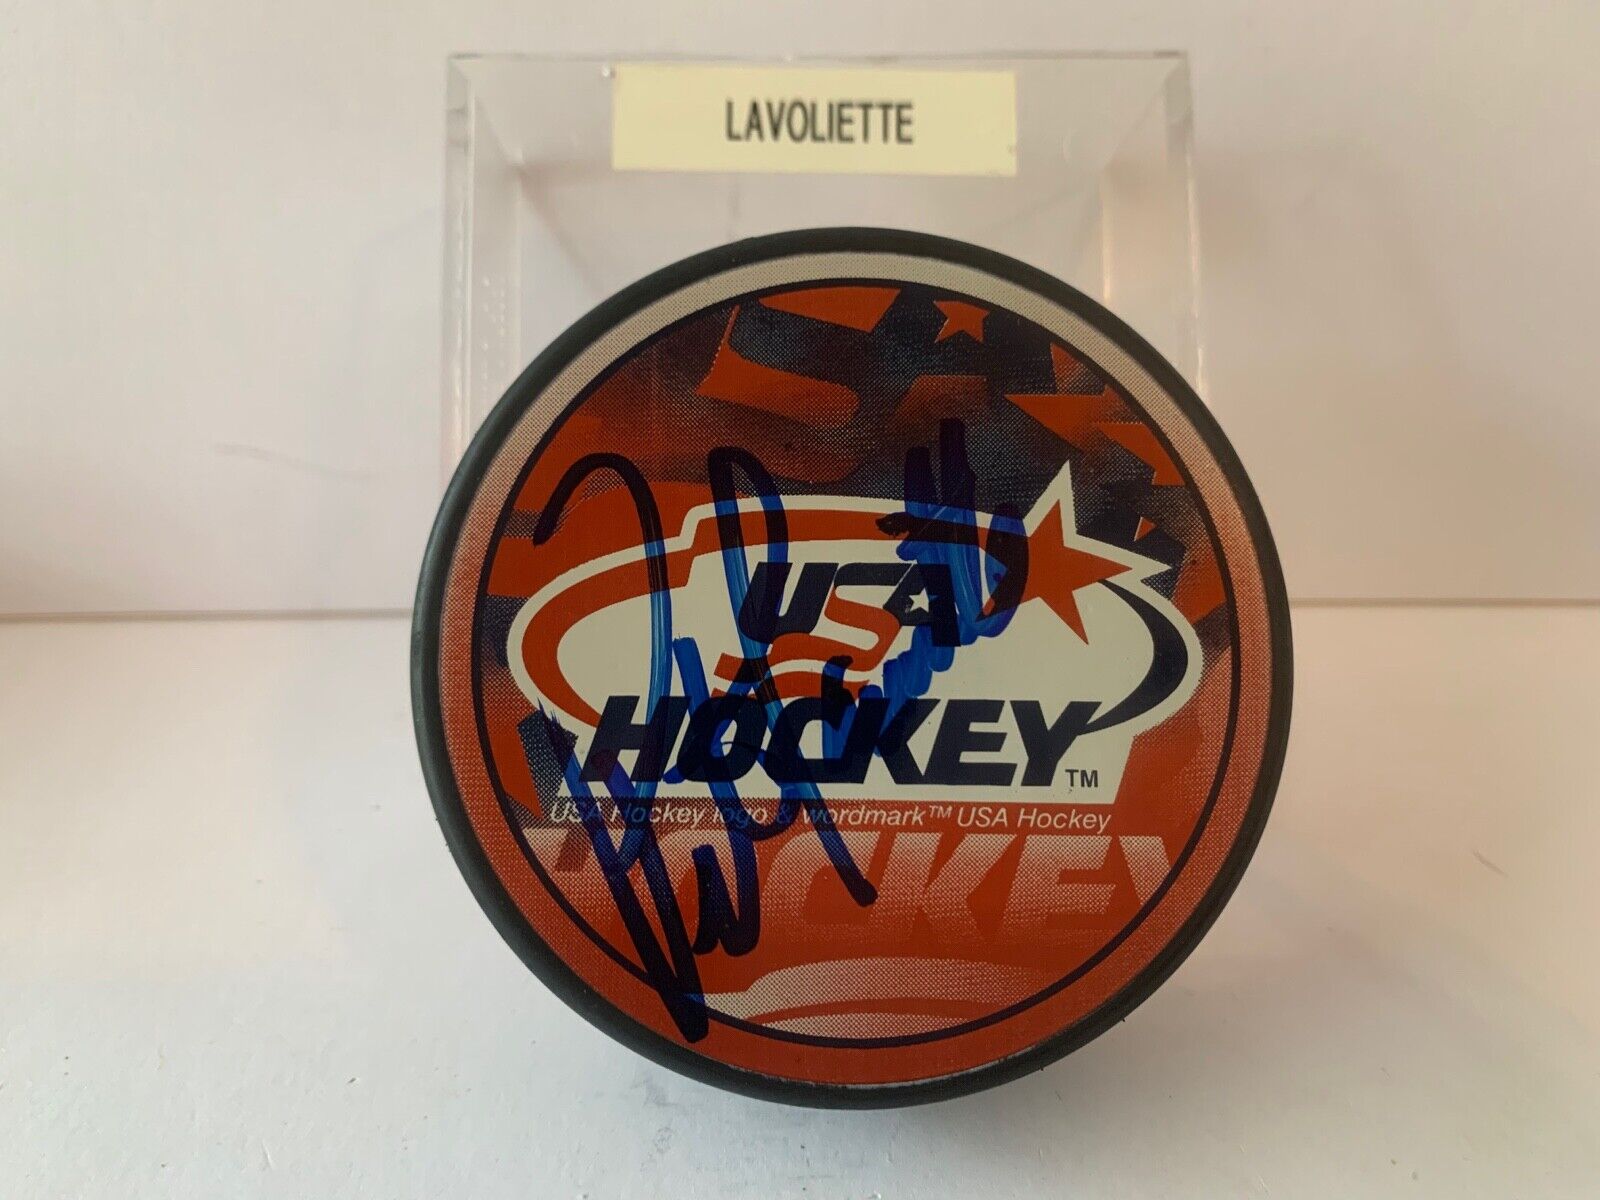 Peter Laviolette Autographed Official NHL Hockey Puck with Team USA Hockey Logo